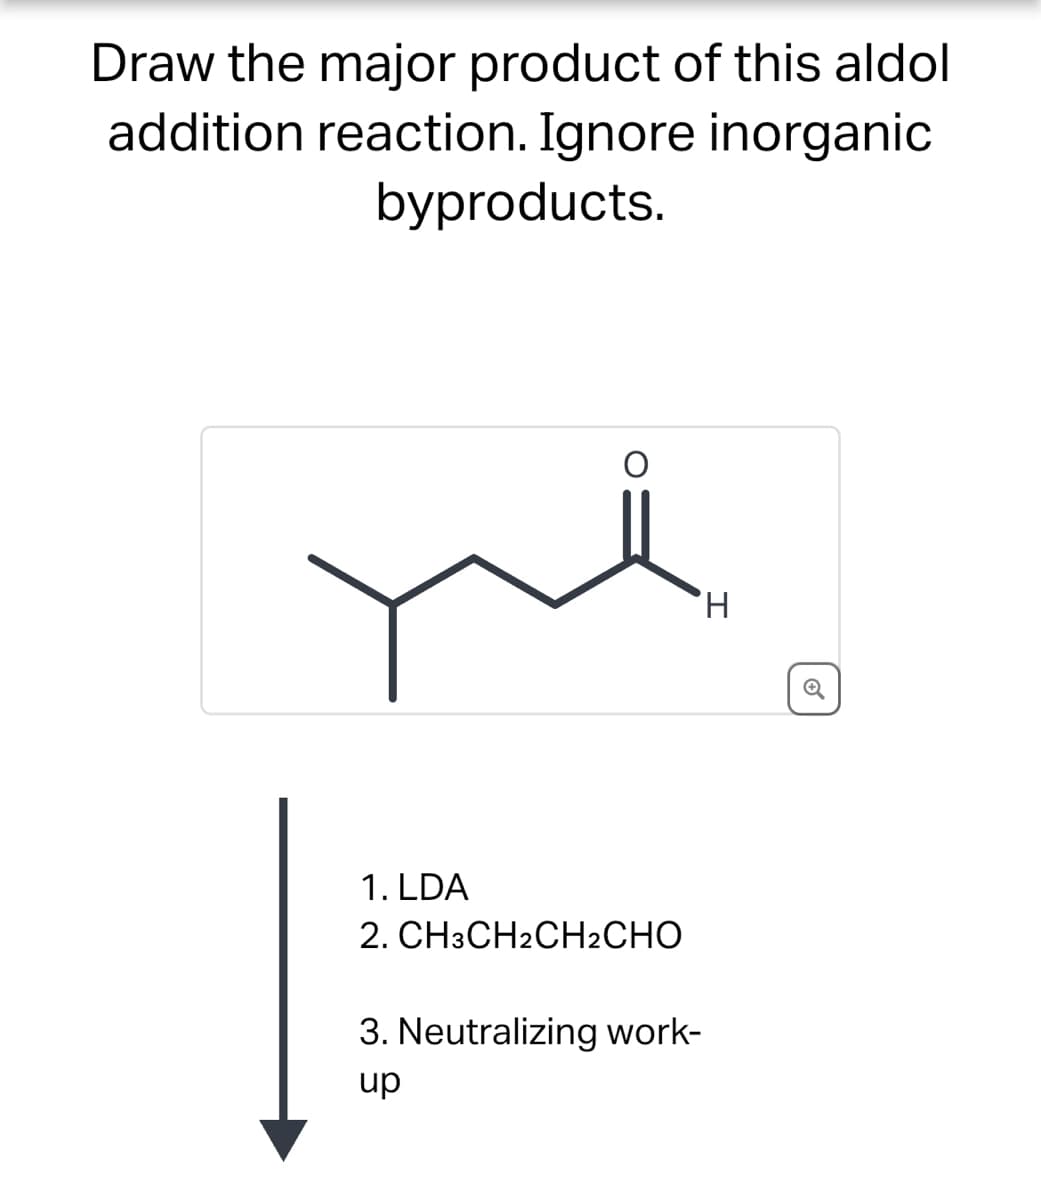 Draw the major product of this aldol
addition reaction. Ignore inorganic
byproducts.
1. LDA
2. CH3CH2CH2CHO
3. Neutralizing work-
up
'H